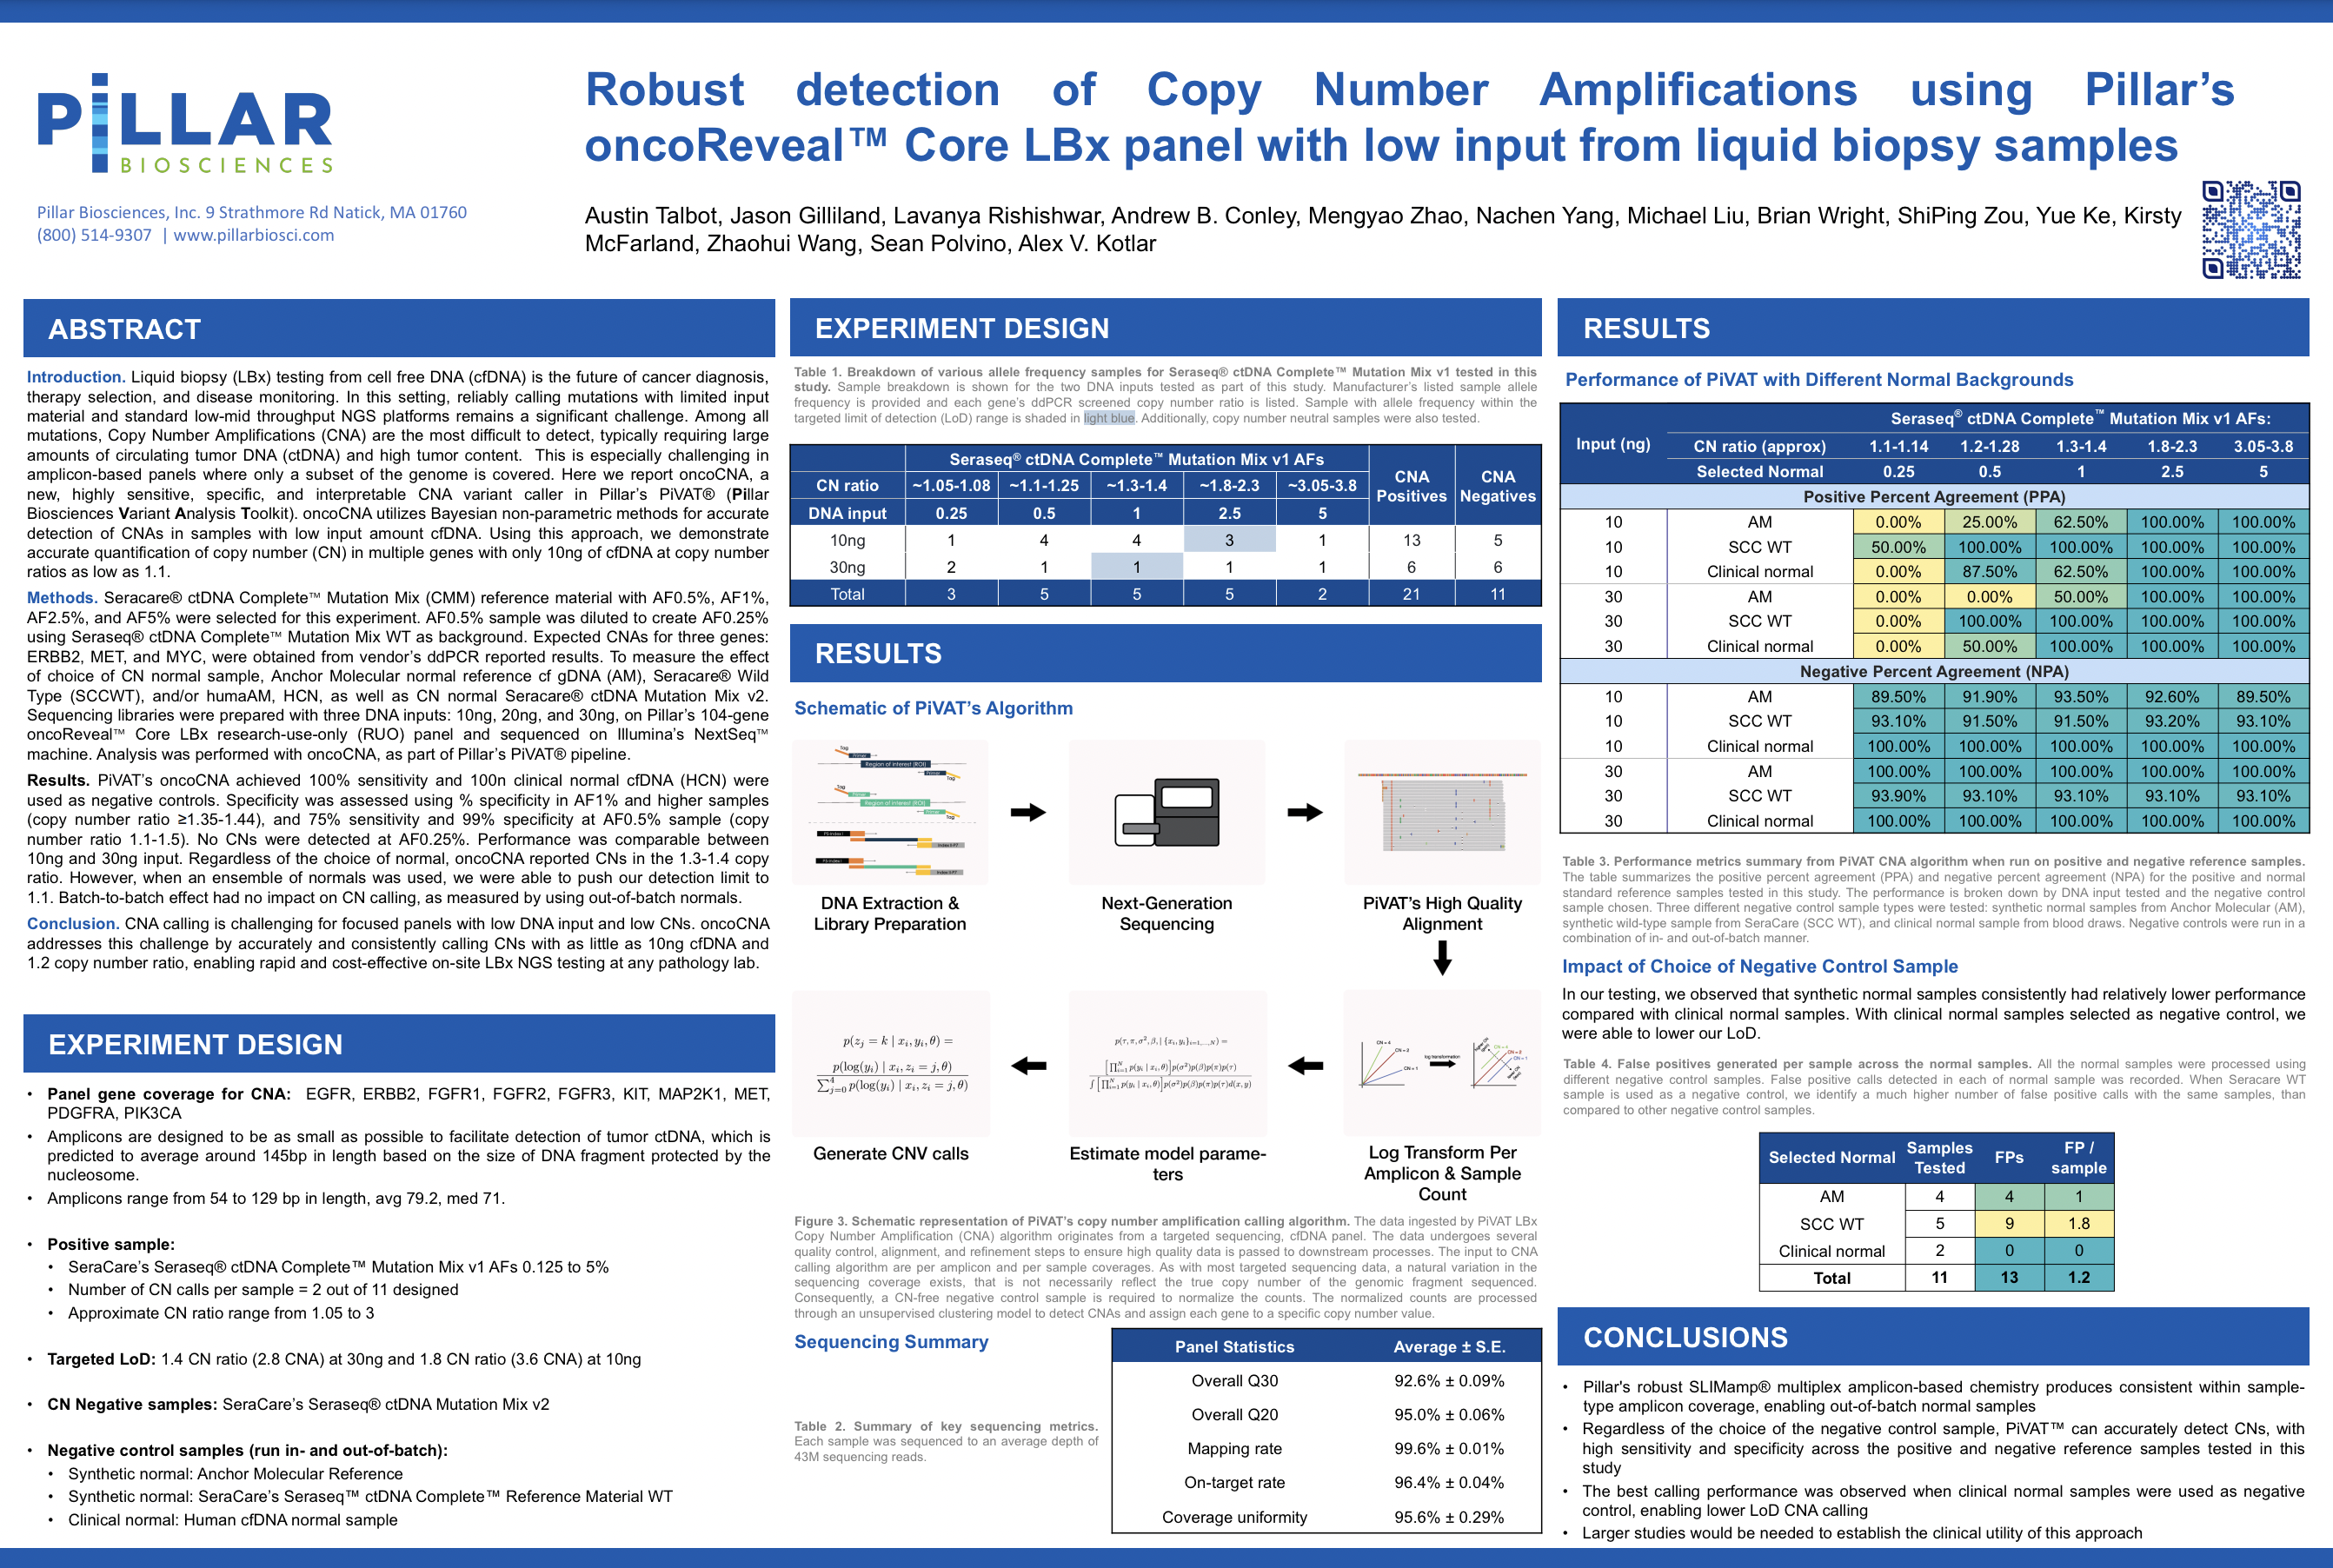 2023 AMP Talbot et al Robust Detection of Copy Number Amplifications Using Pillar's oncoReveal Core LBx Panel